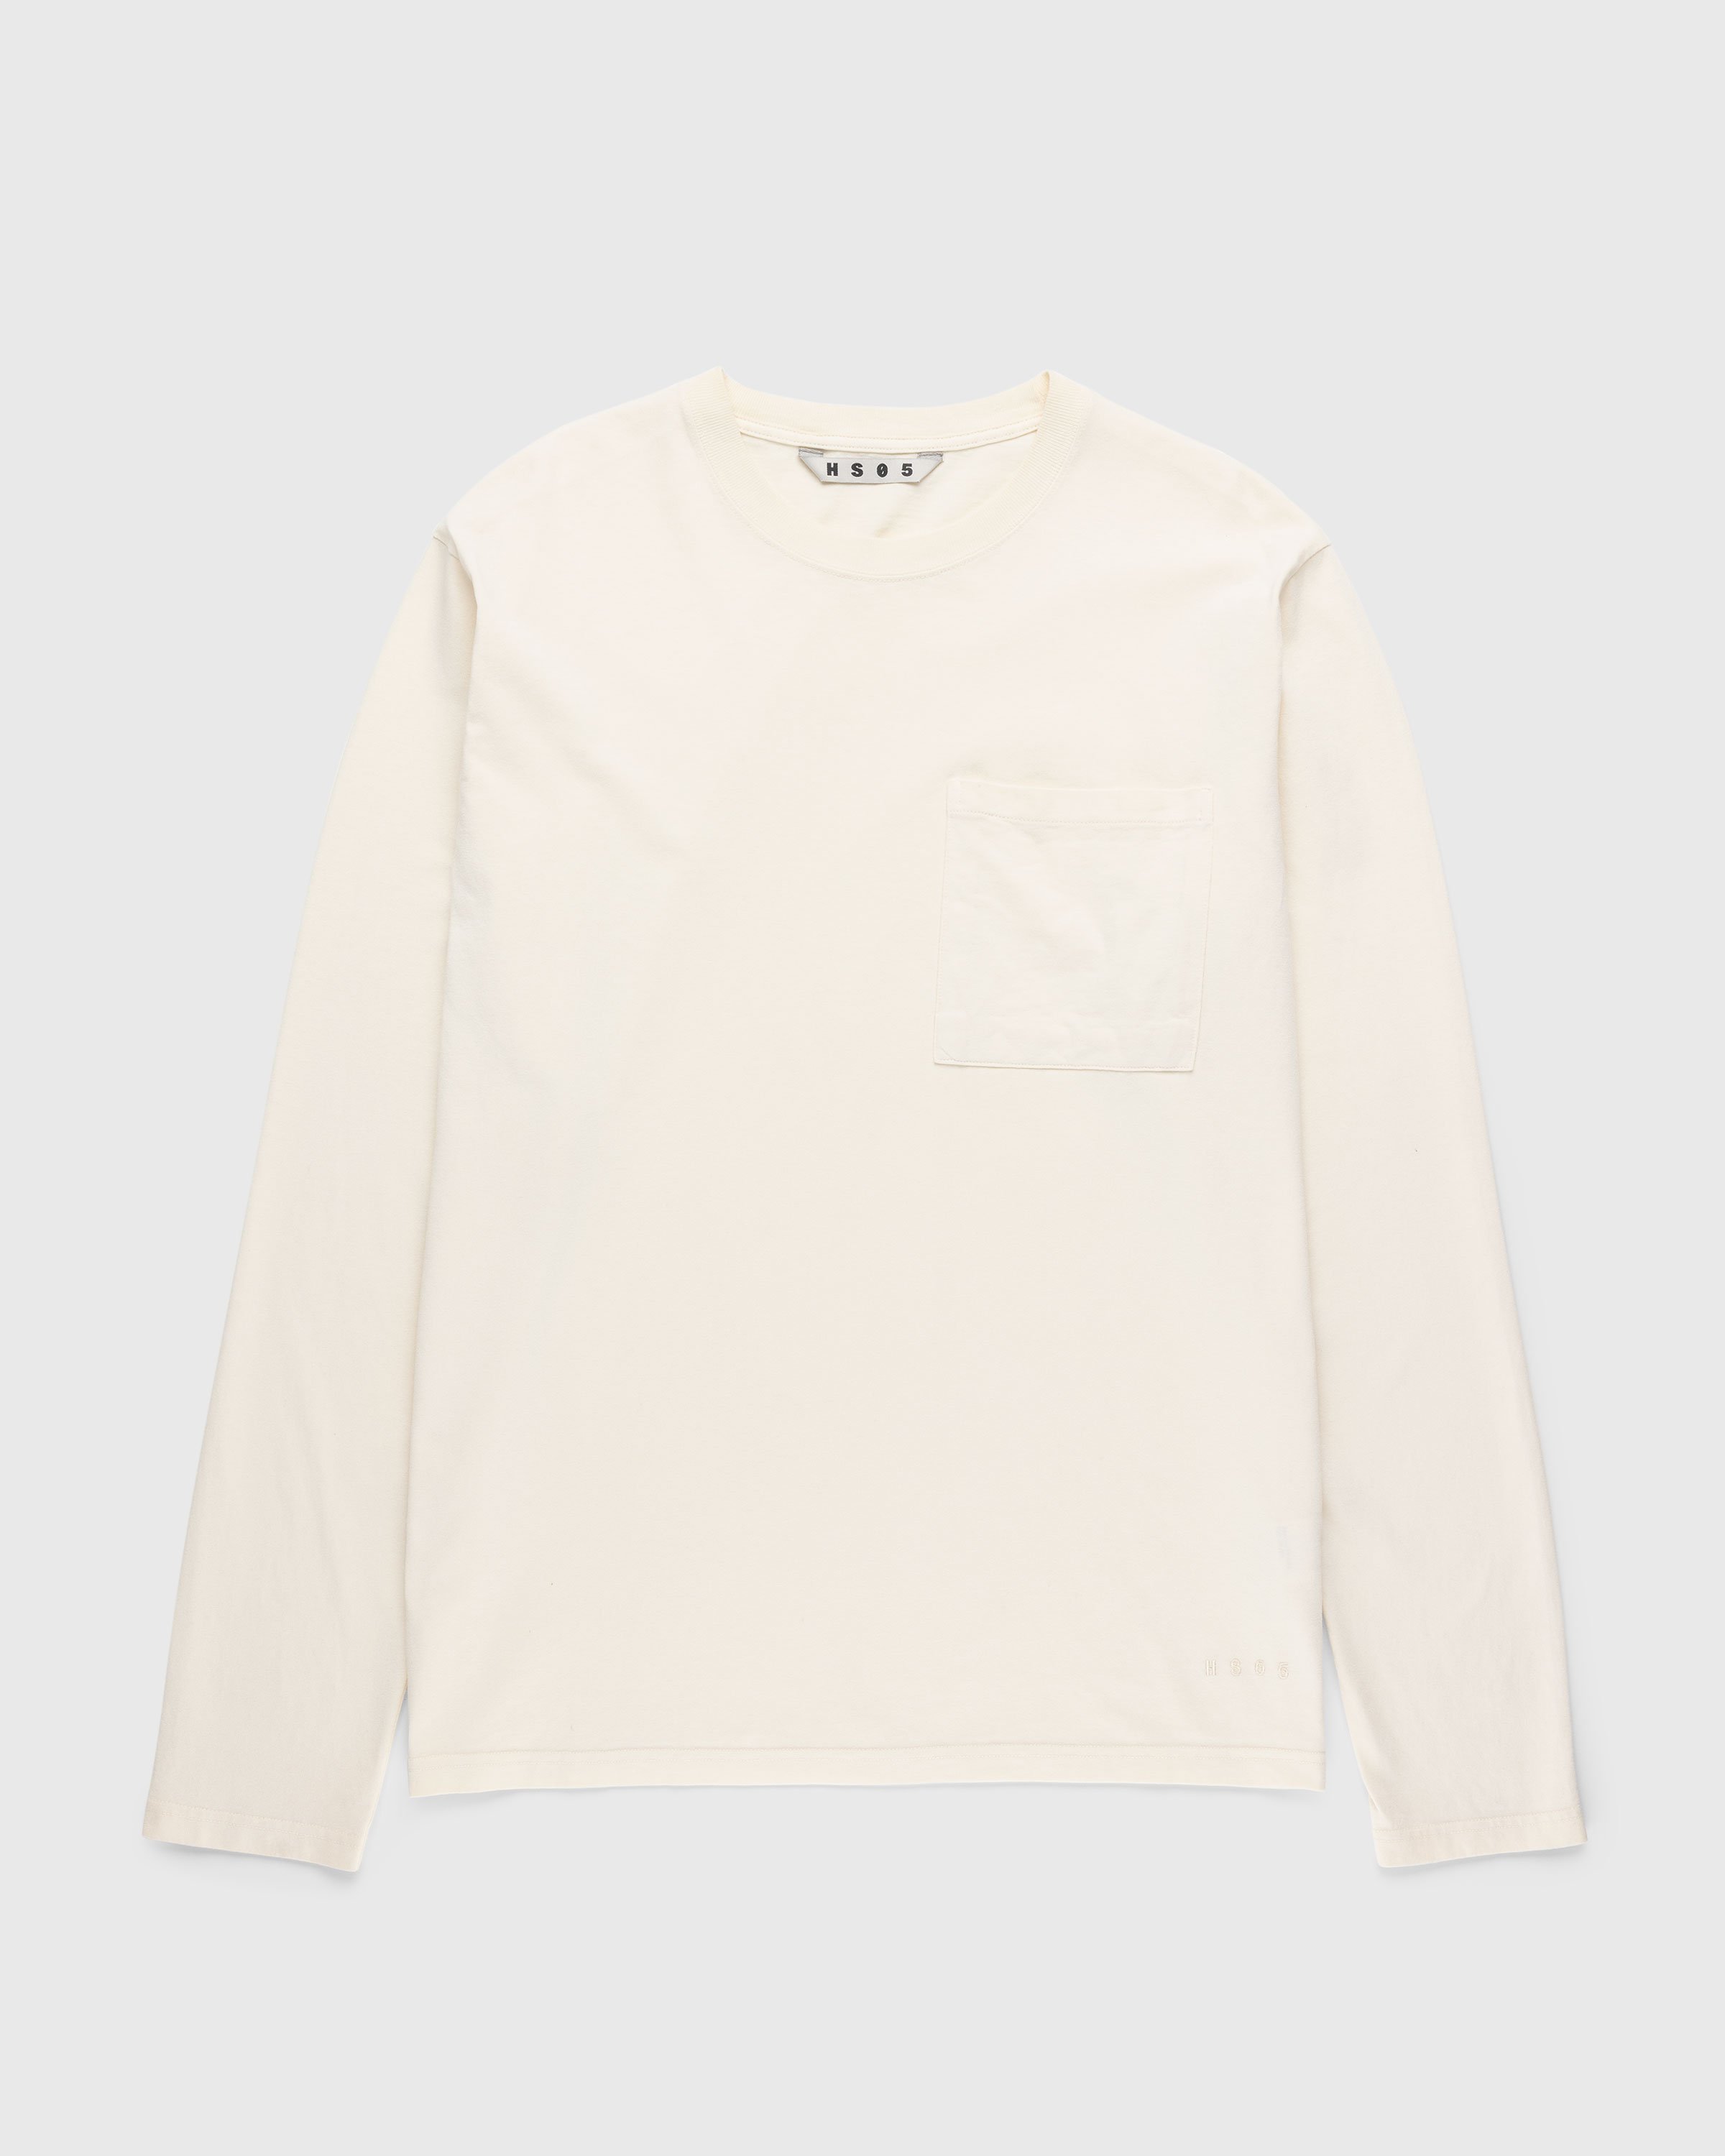 Highsnobiety HS05 - Pigment Dyed Boxy Long Sleeves Jersey Natural - Clothing - Beige - Image 1